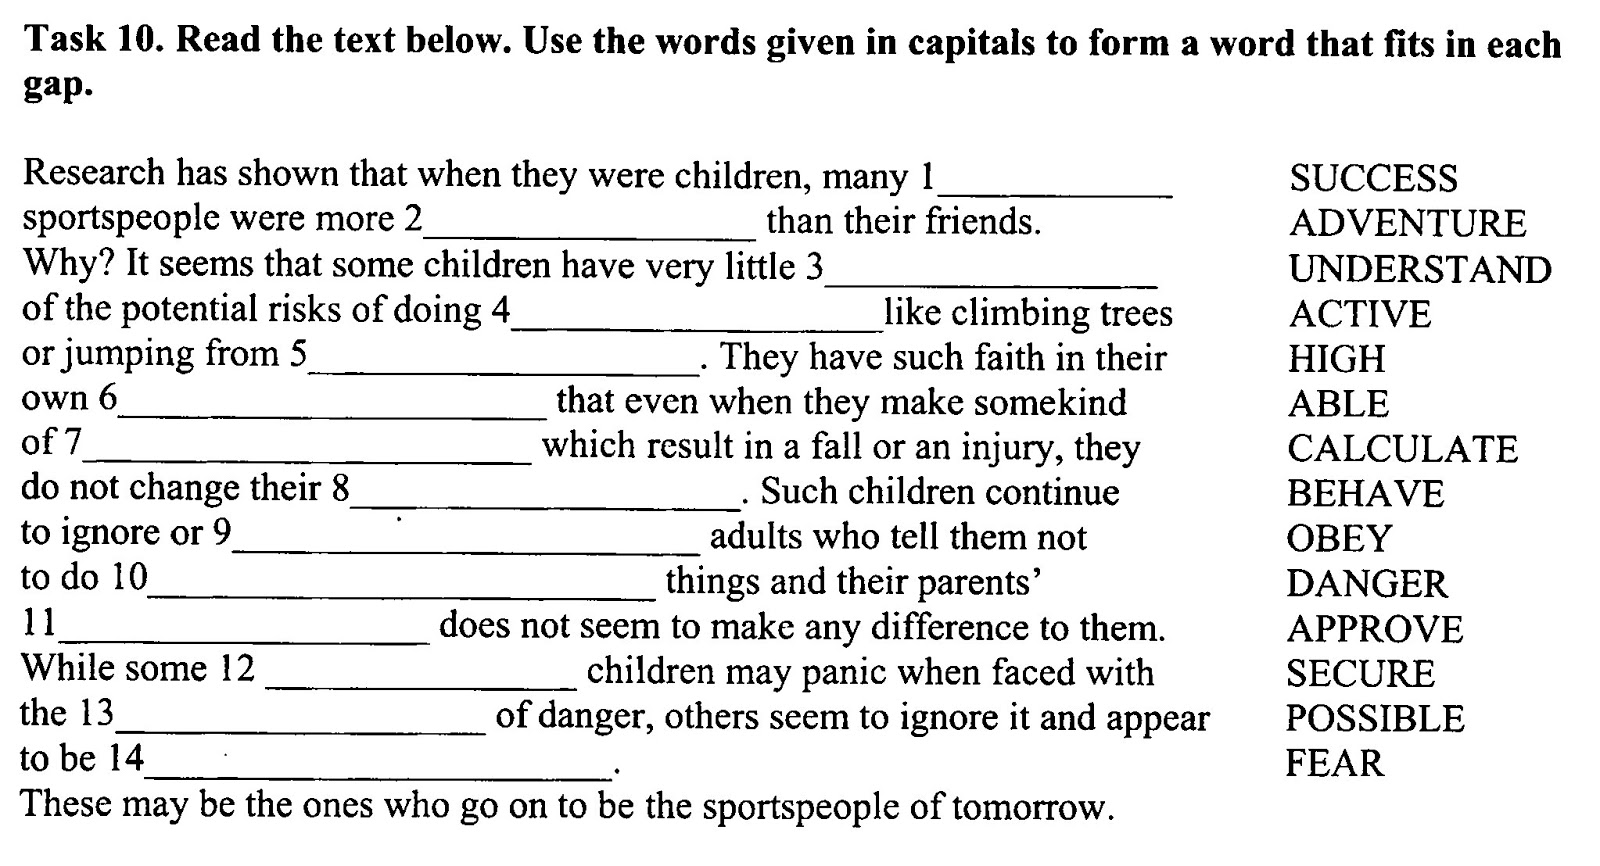 Word formation 4. Use the Word given in Capitals to form a Word that Fits in the gap. Word formation 7 класс английский язык. Read task. Word formation possible.